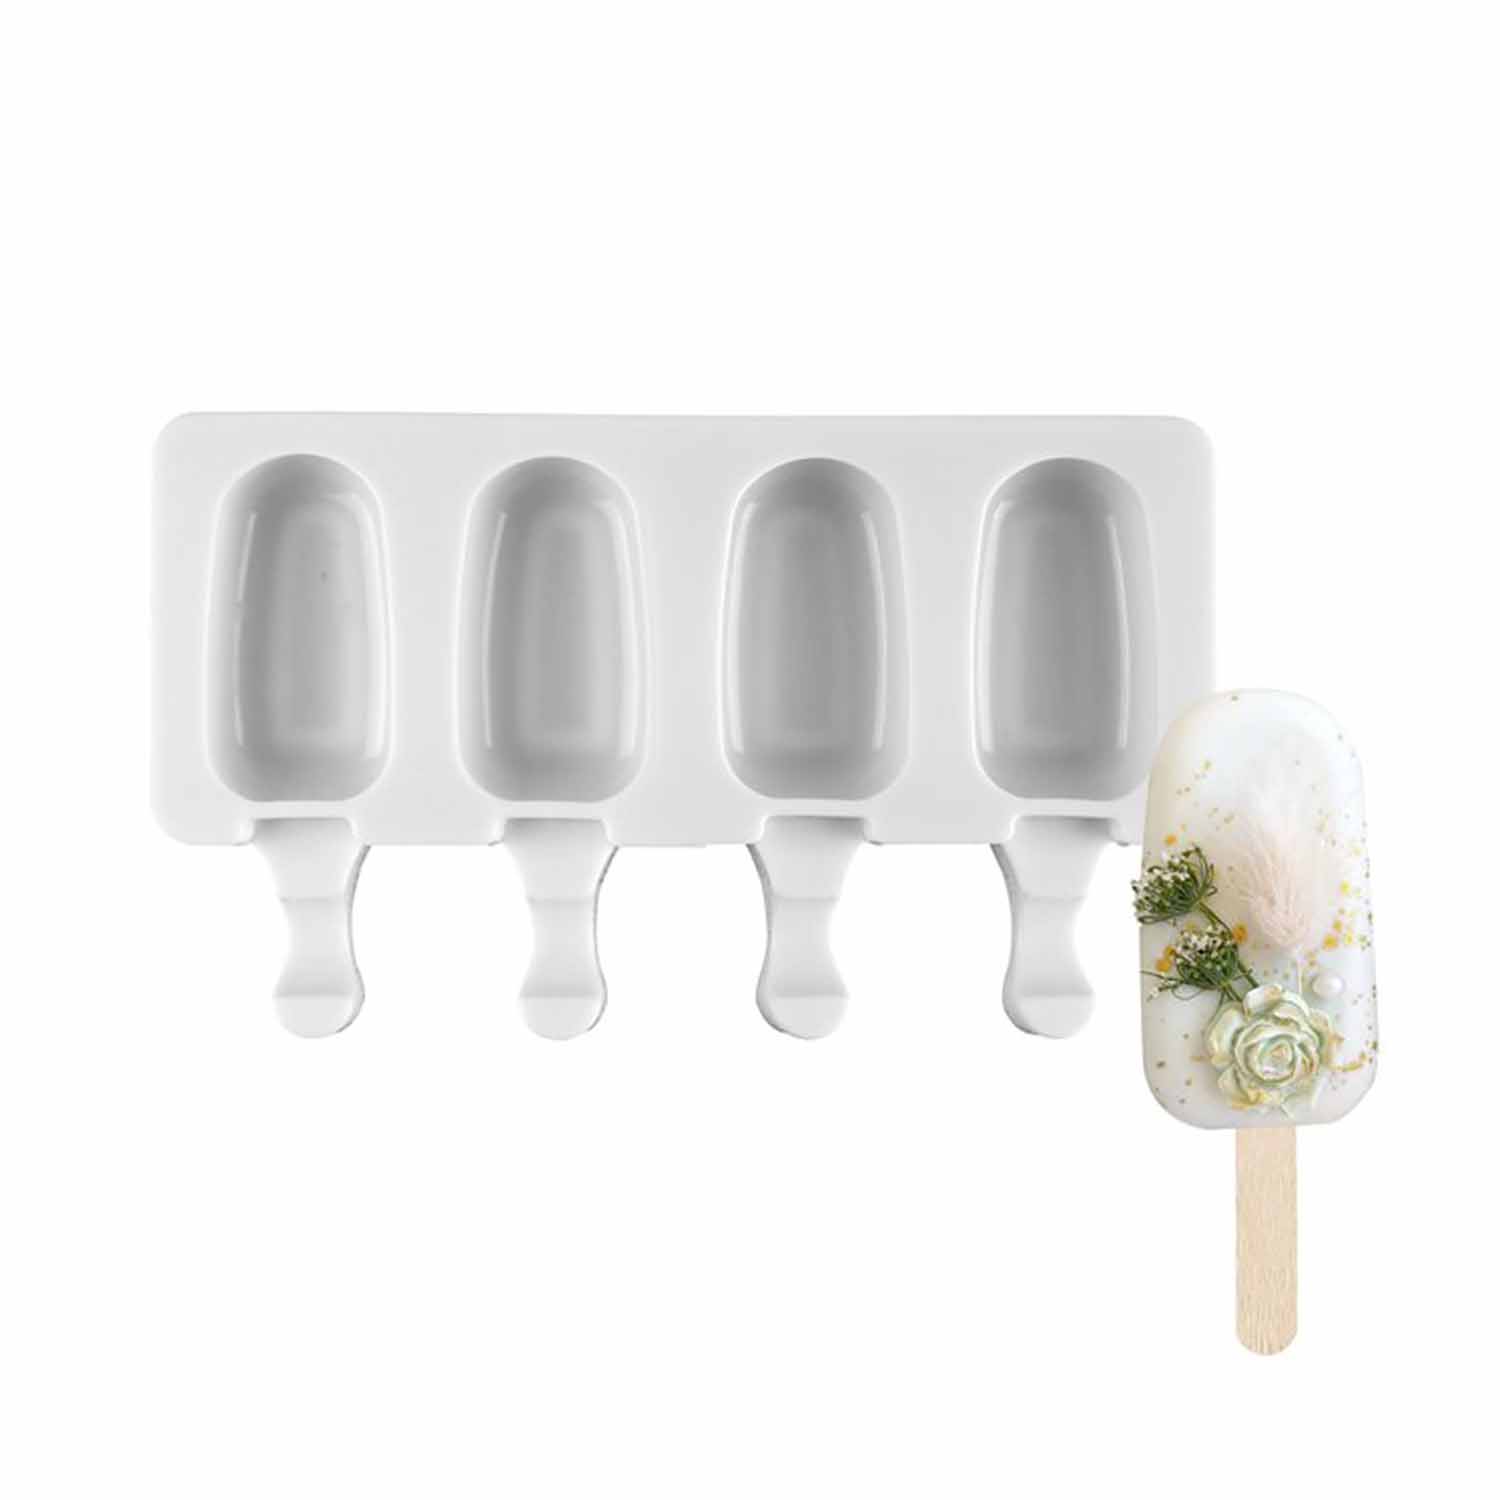 Handstand Kitchen Ice Cream Parlor Popsicle Mini Mold